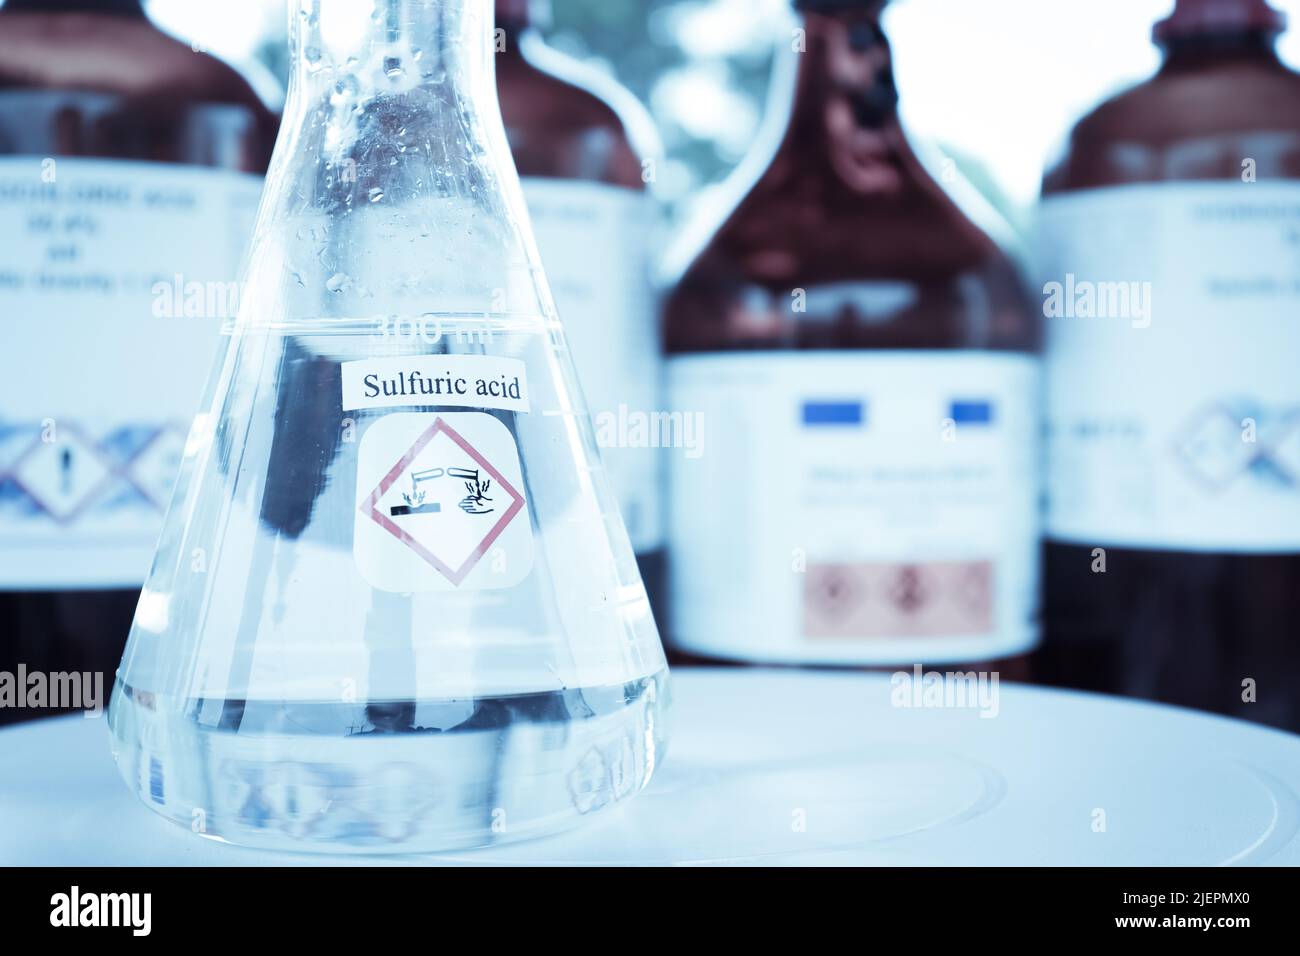 sulfuric acid in glass, chemical in the laboratory and industry Stock Photo